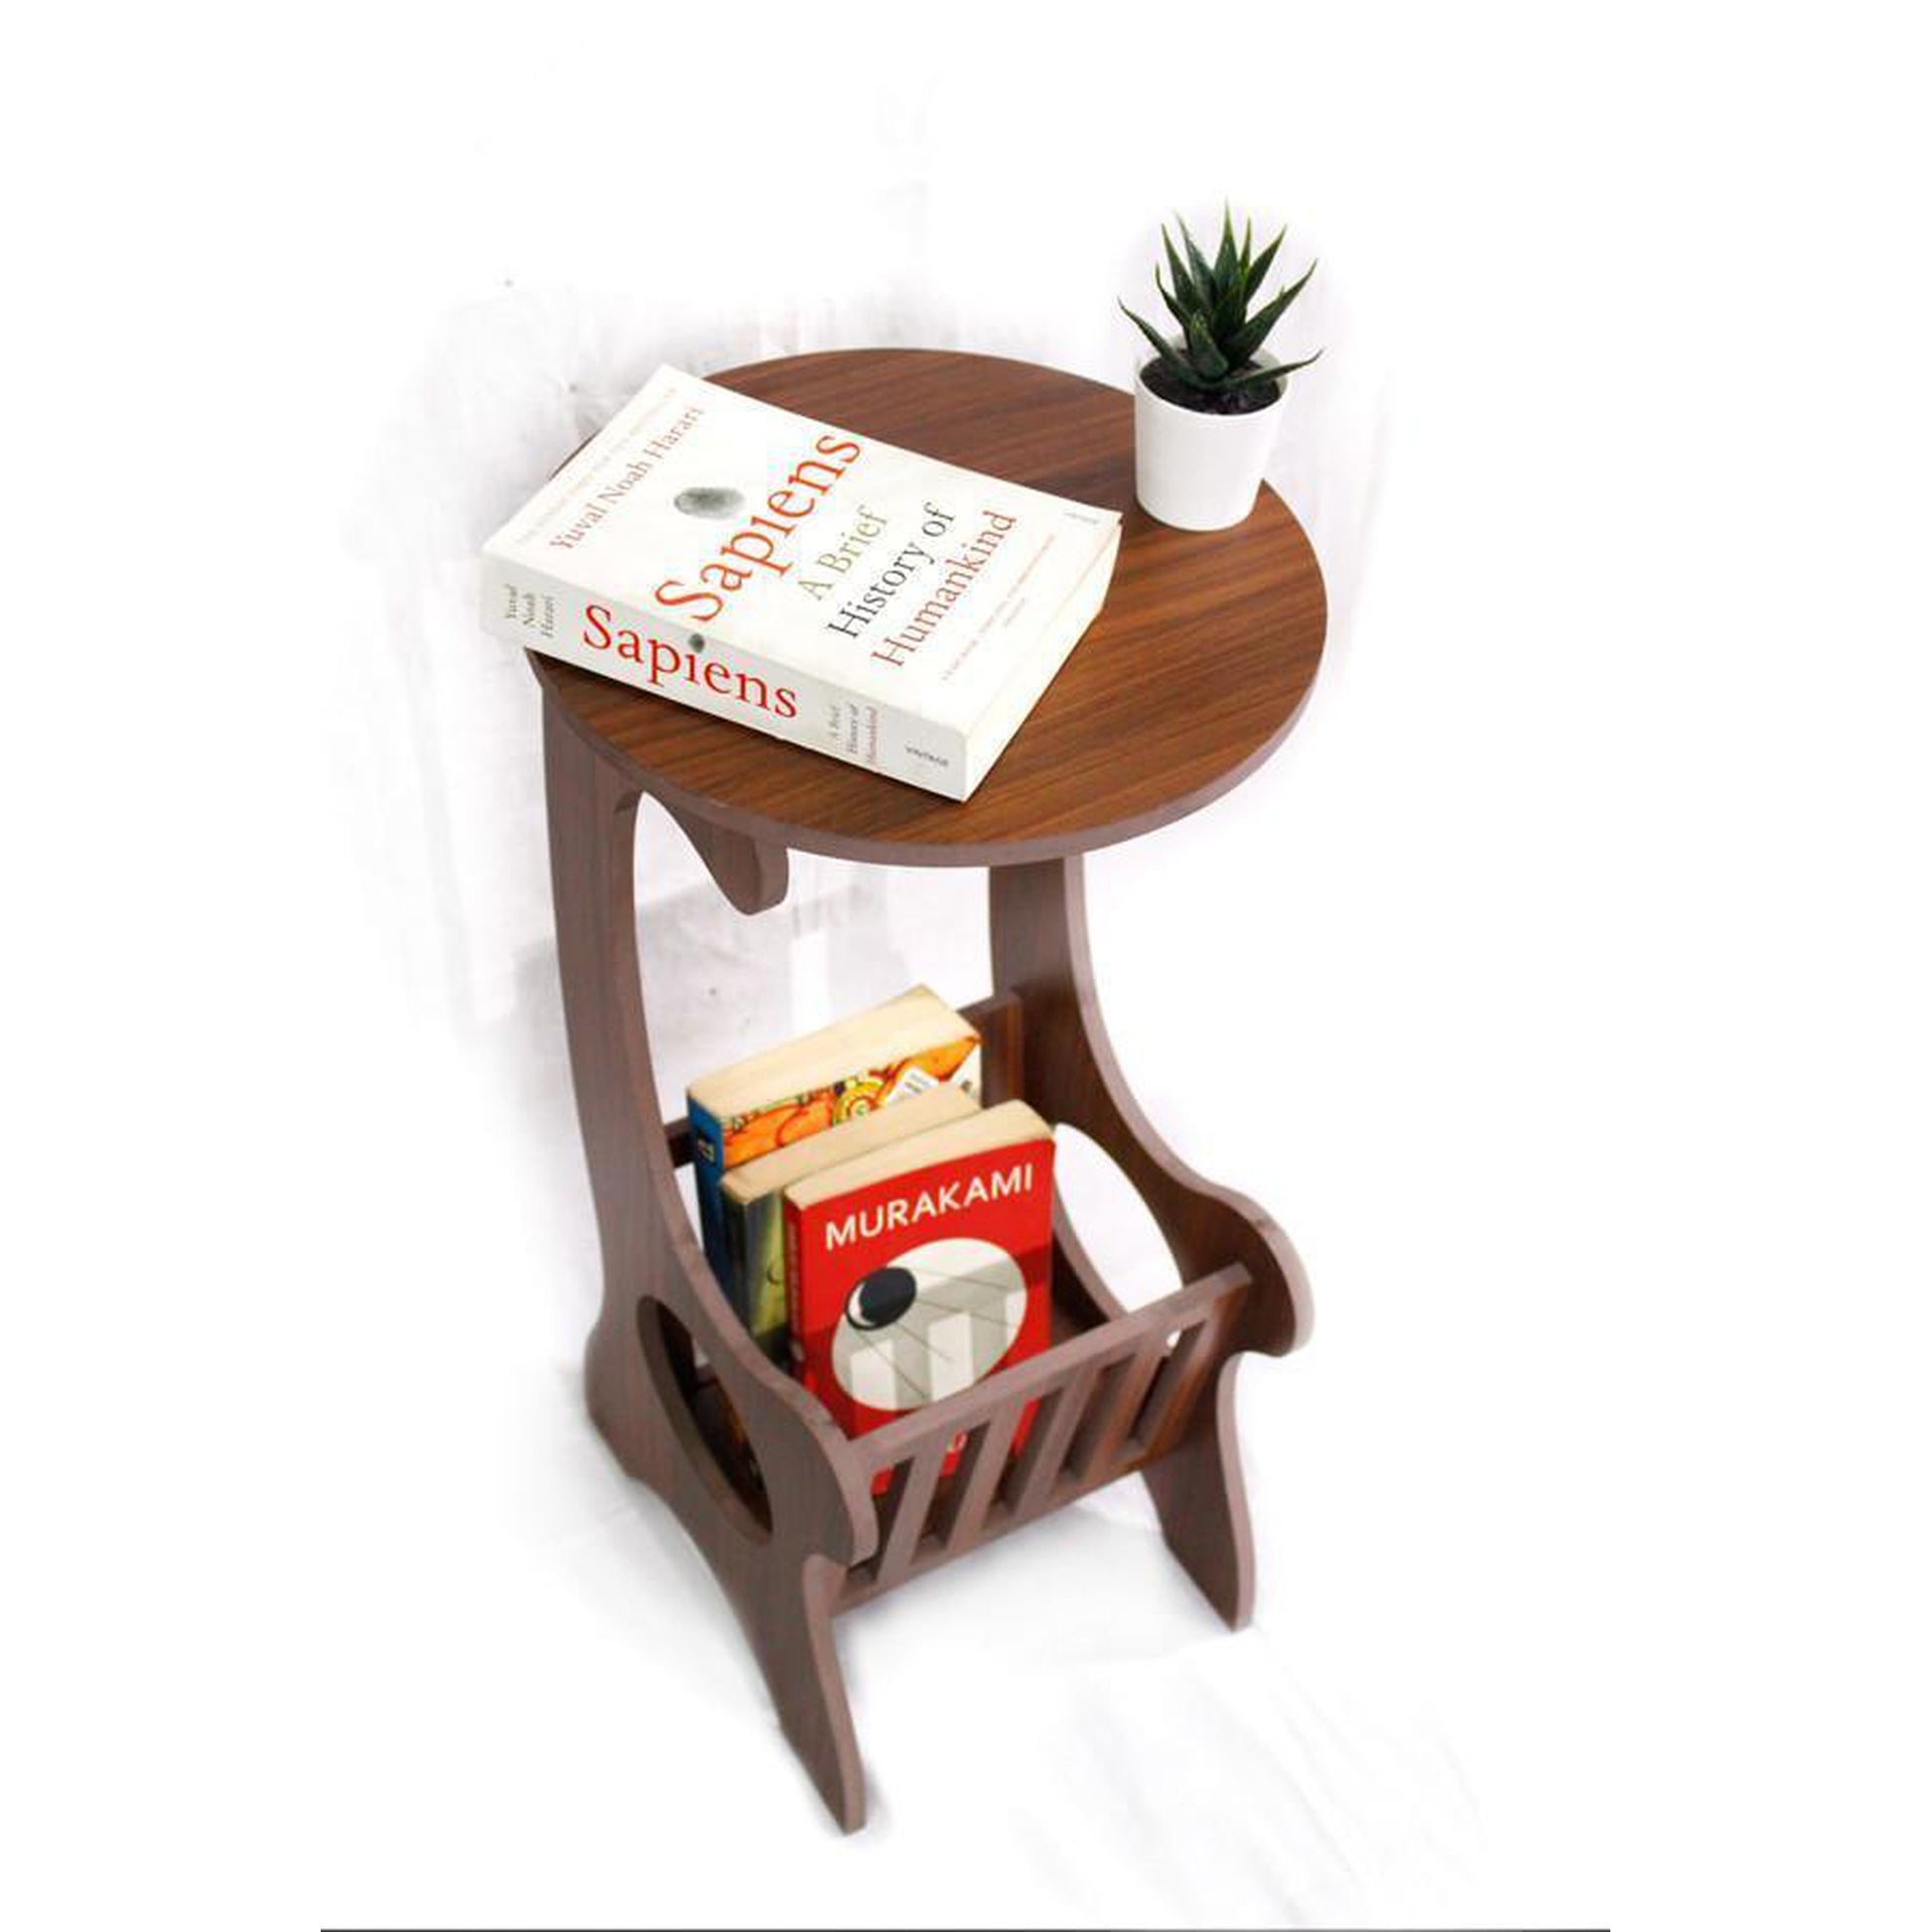 Living Room Coffee Table with Magazine Storage Stand - The Teal Thread